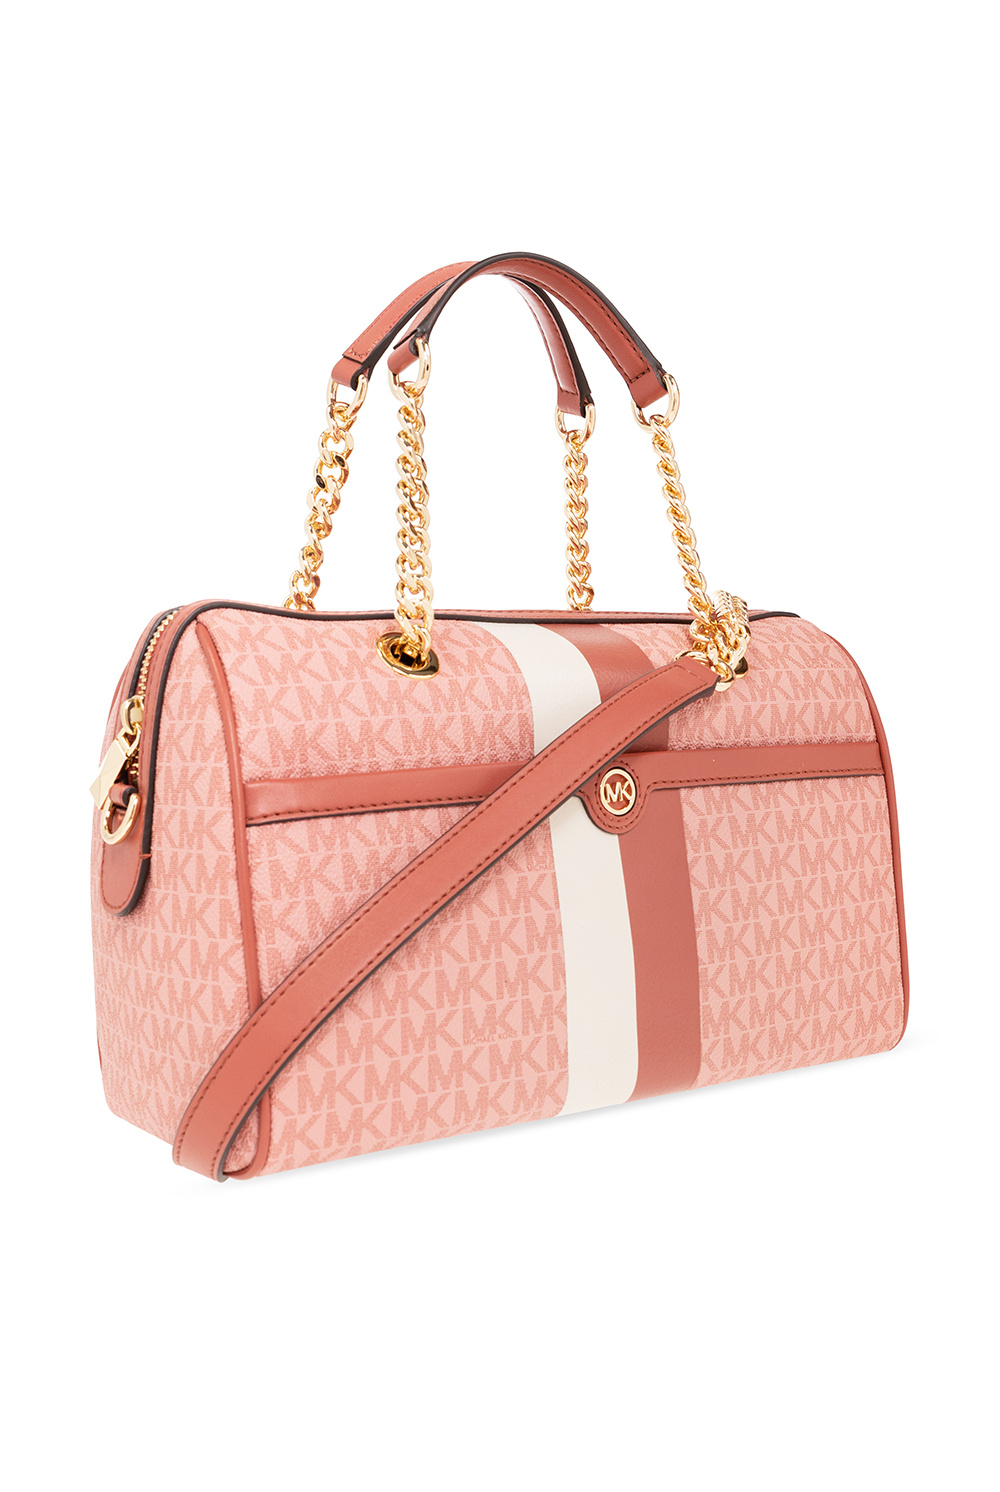 BagHaven.The - Check out Michael Kors Maisie Medium